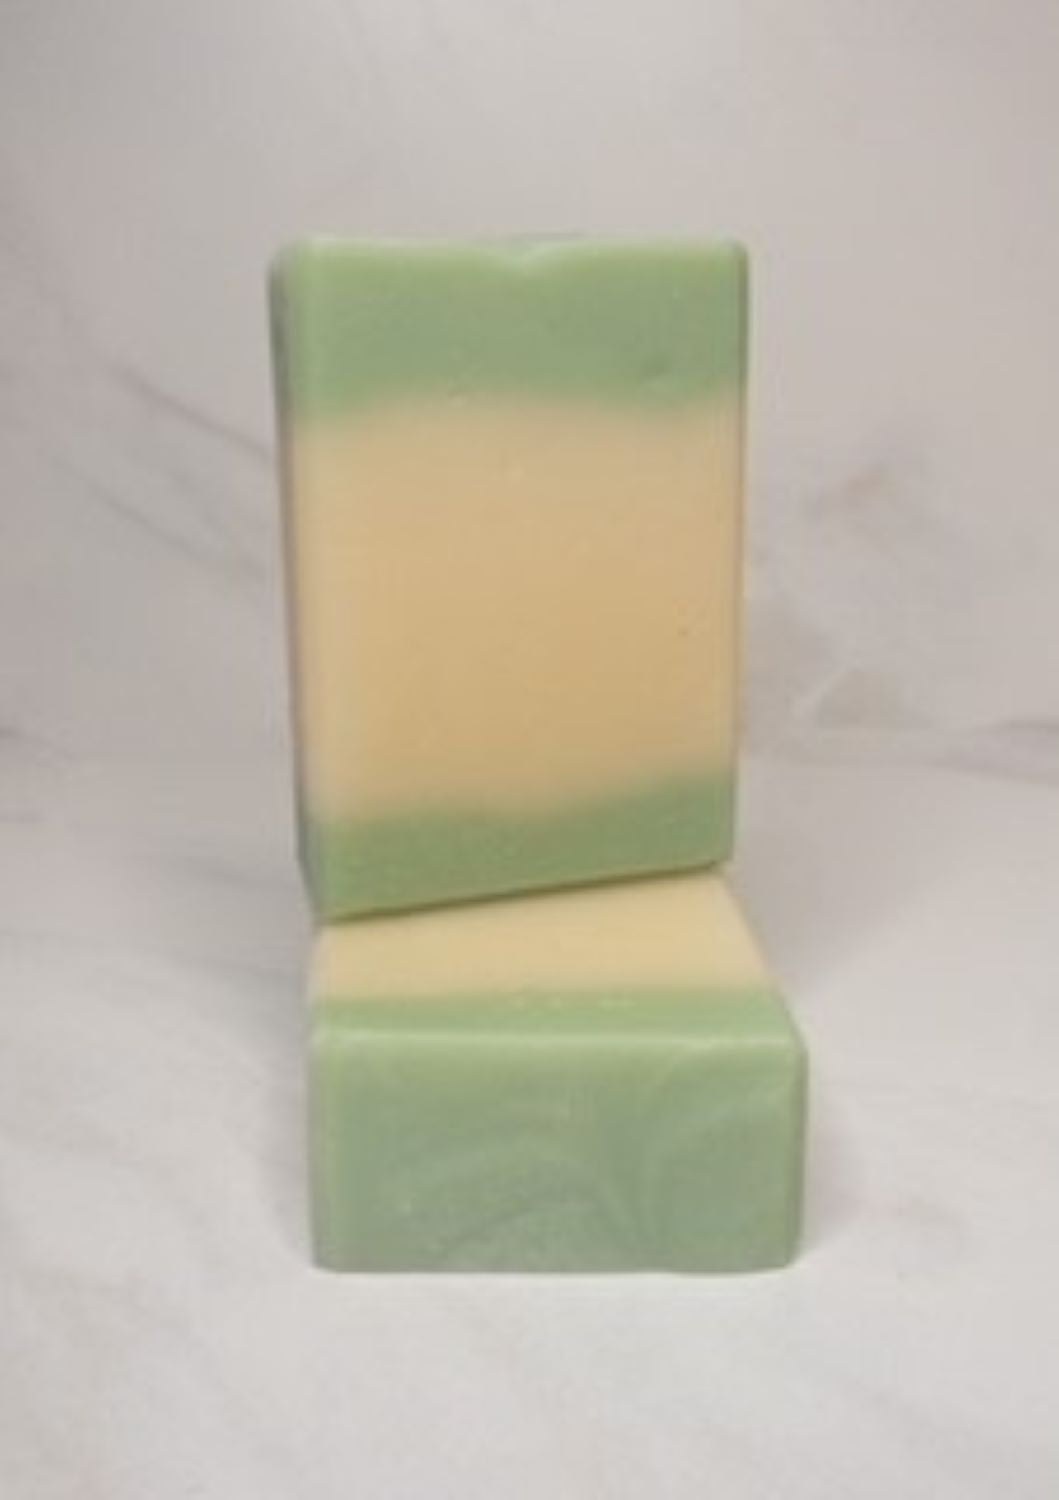 Pearberry Goat Milk Soap